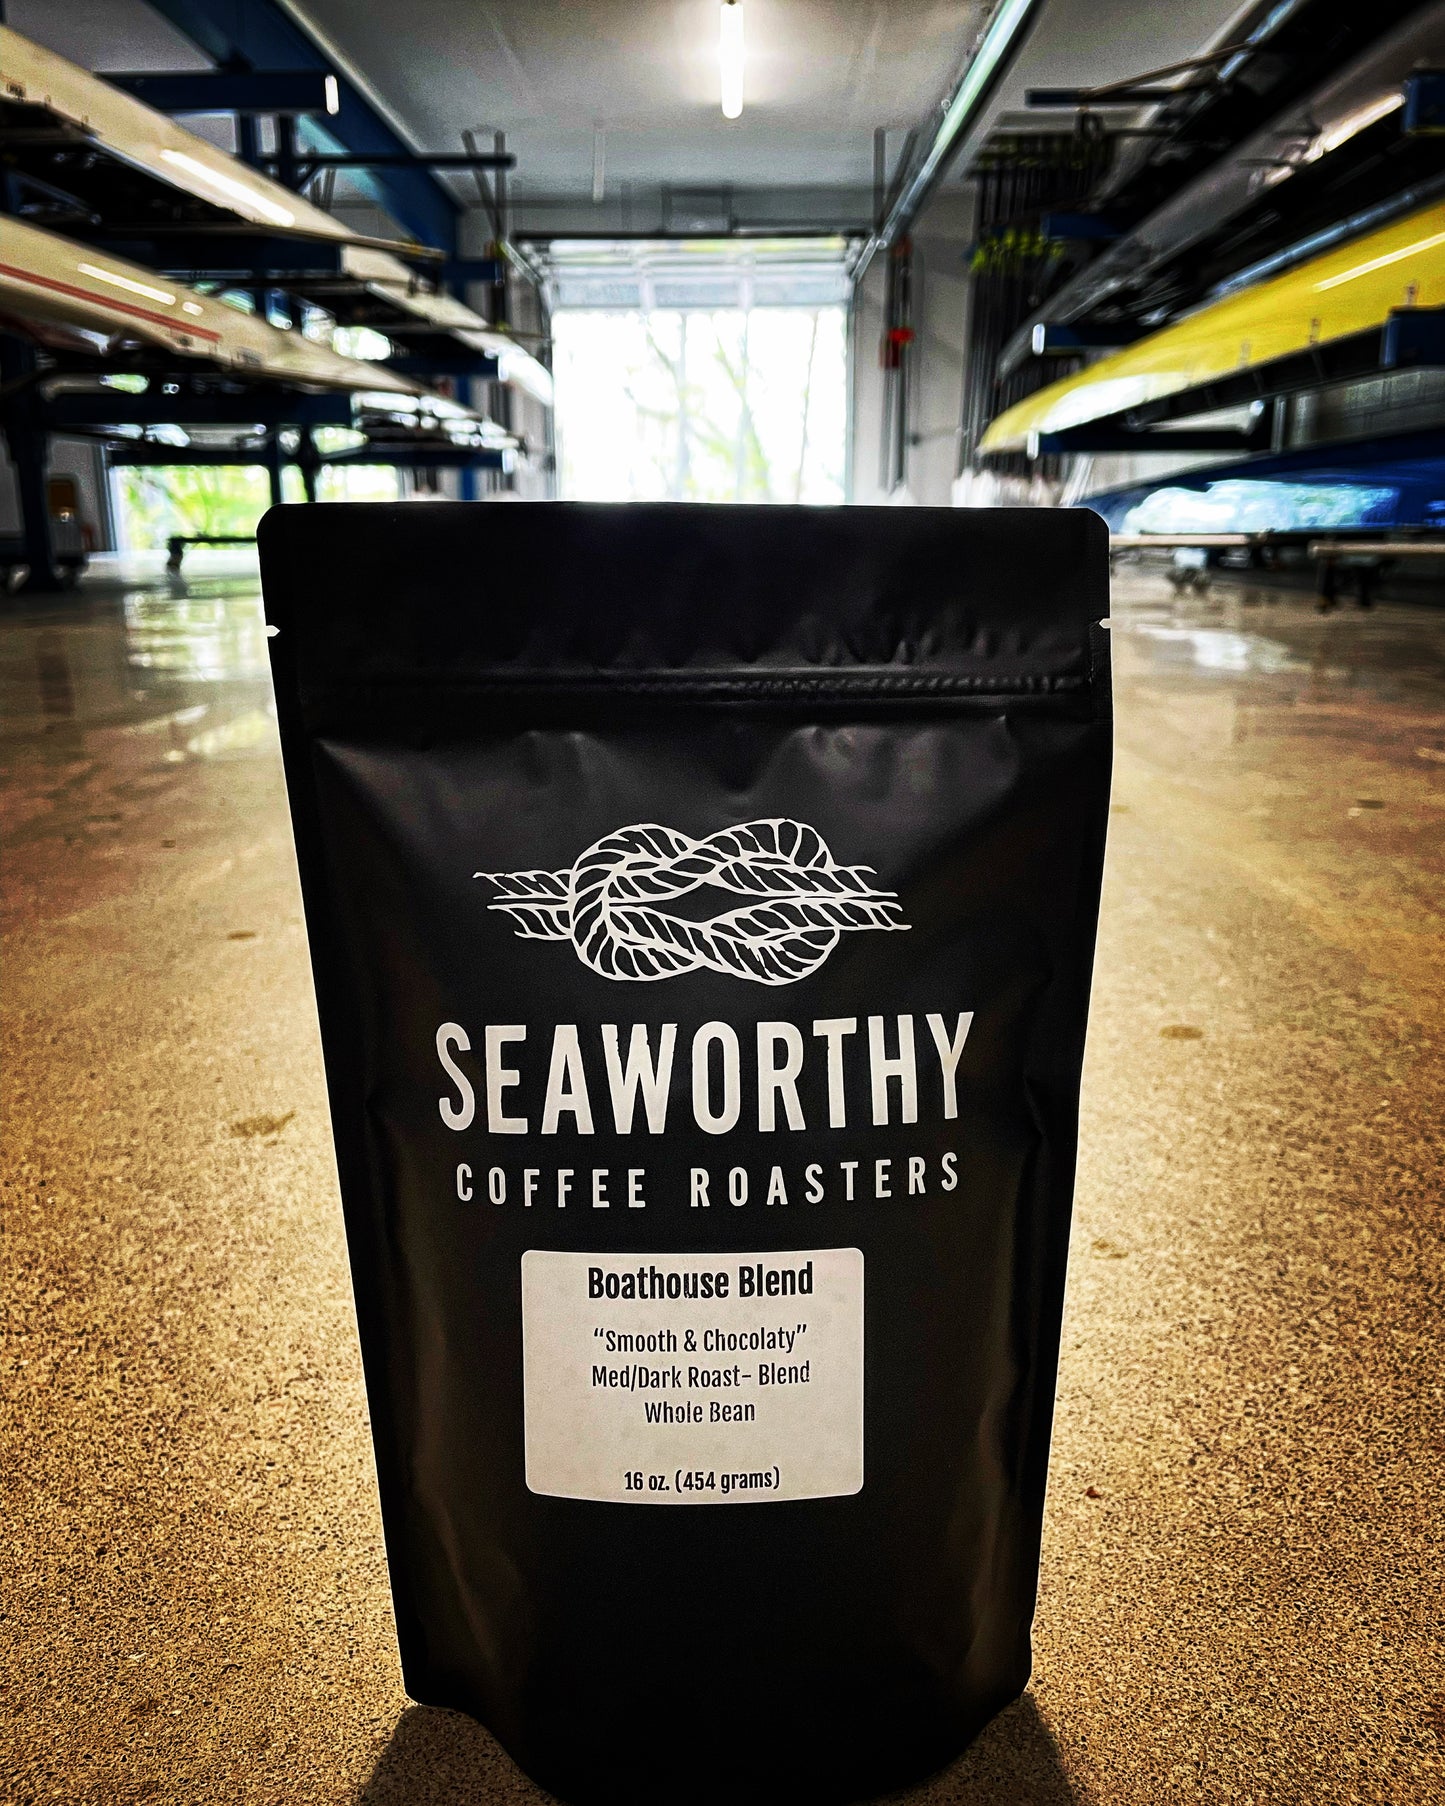 16 ounce bag of boathouse blend seaworthy coffee in a rowing boathouse